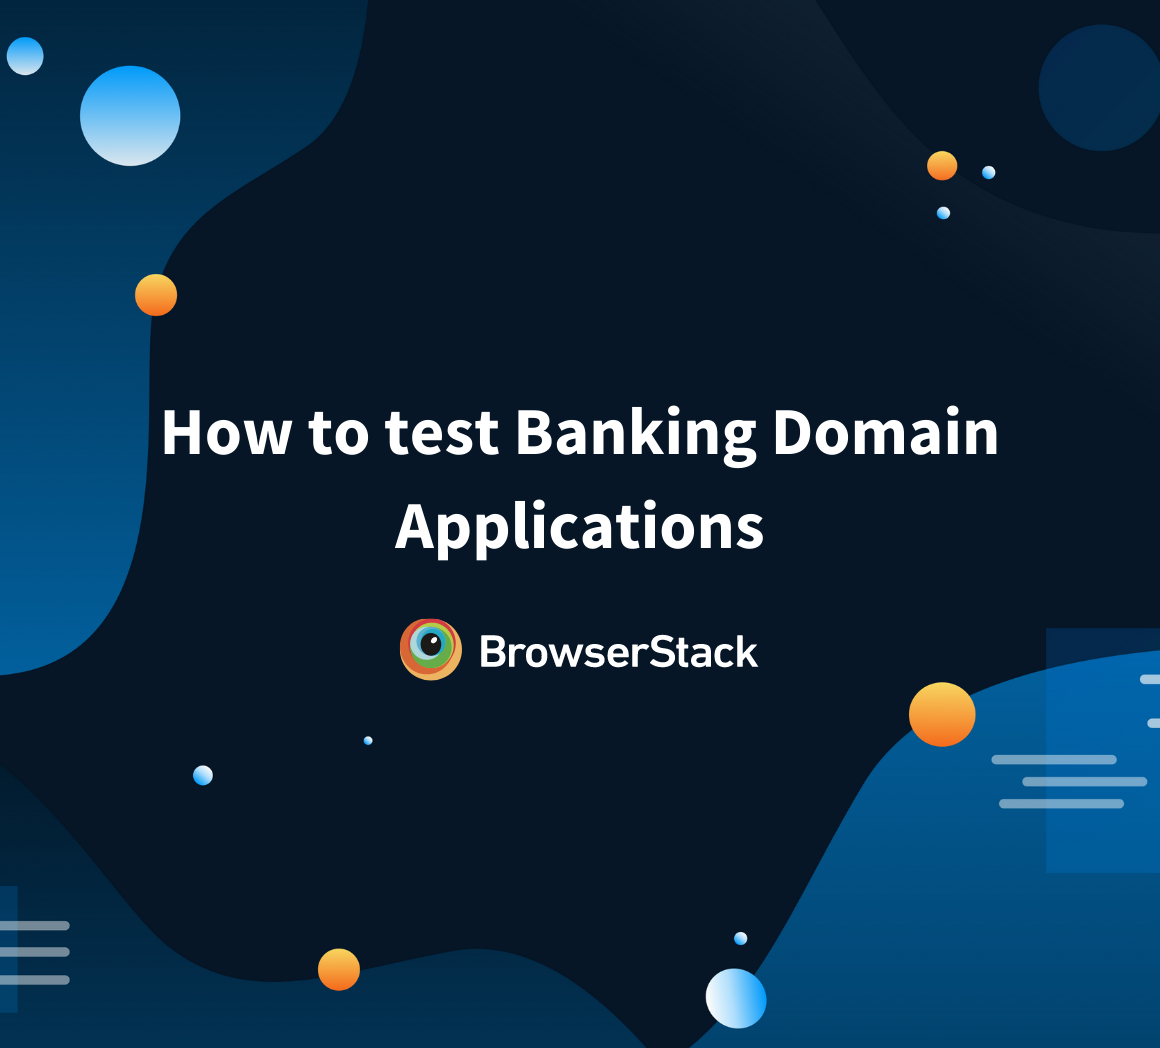 Test Banking Apps 101